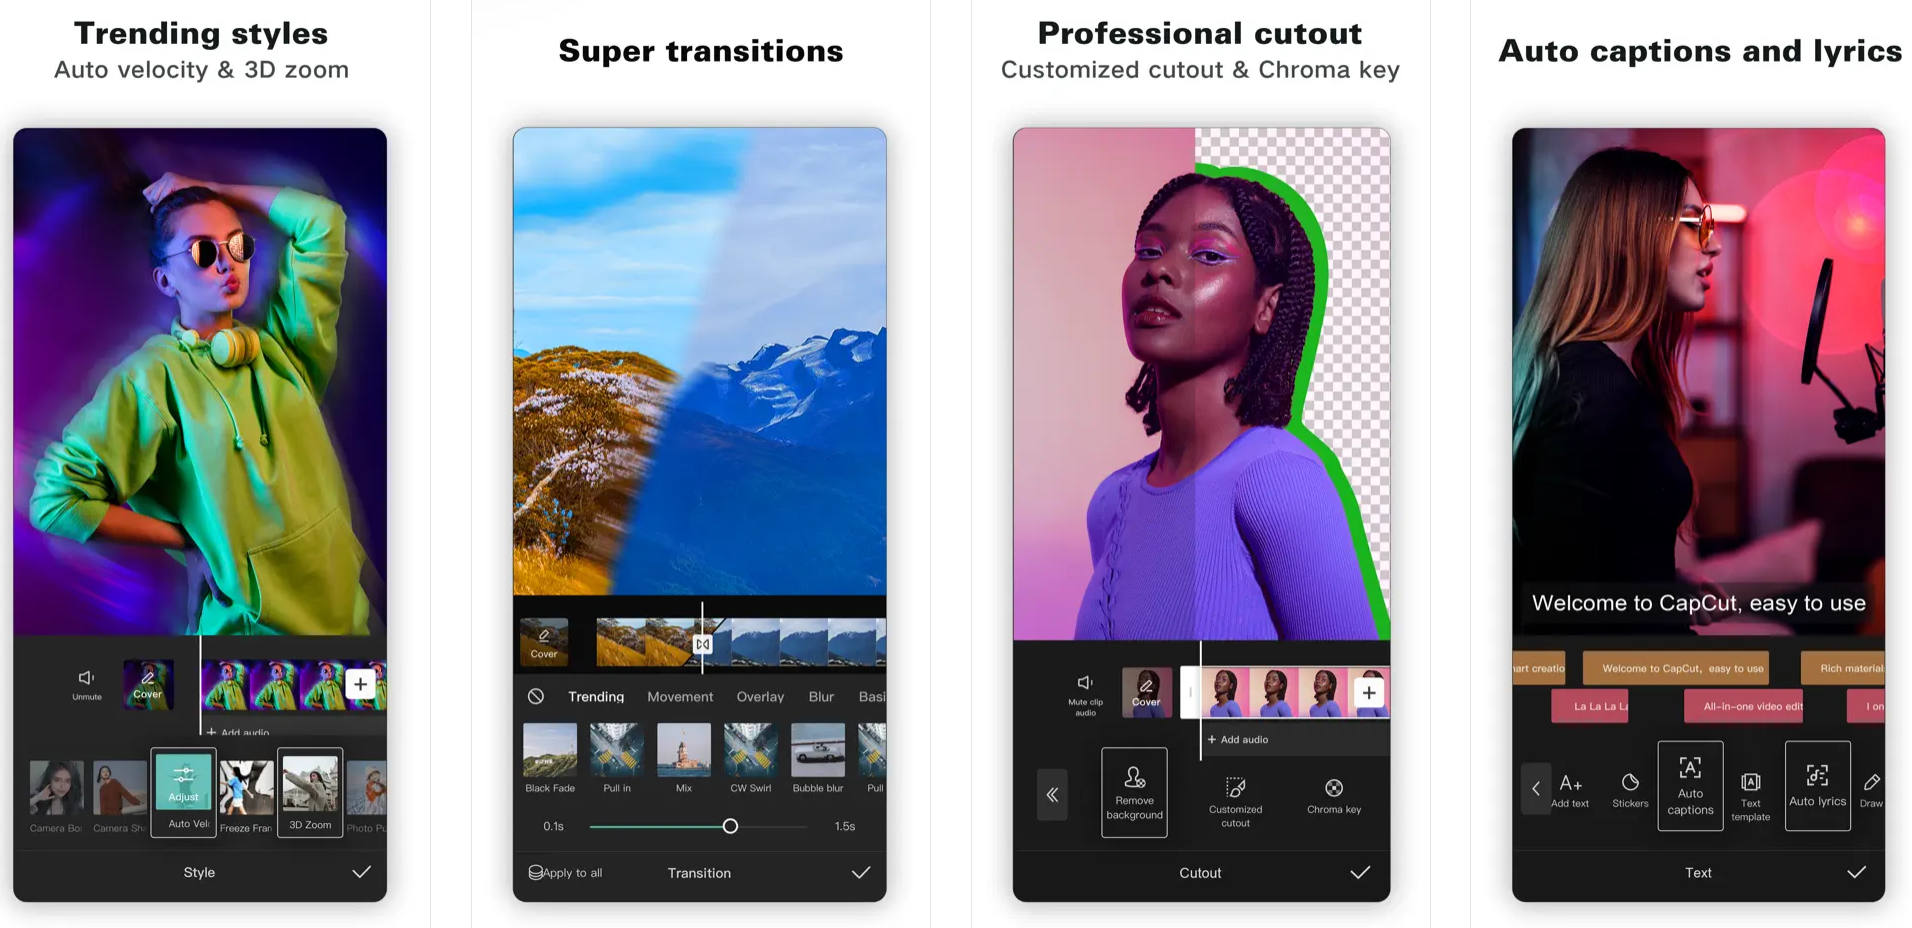 Video editing features of CapCut mobile app